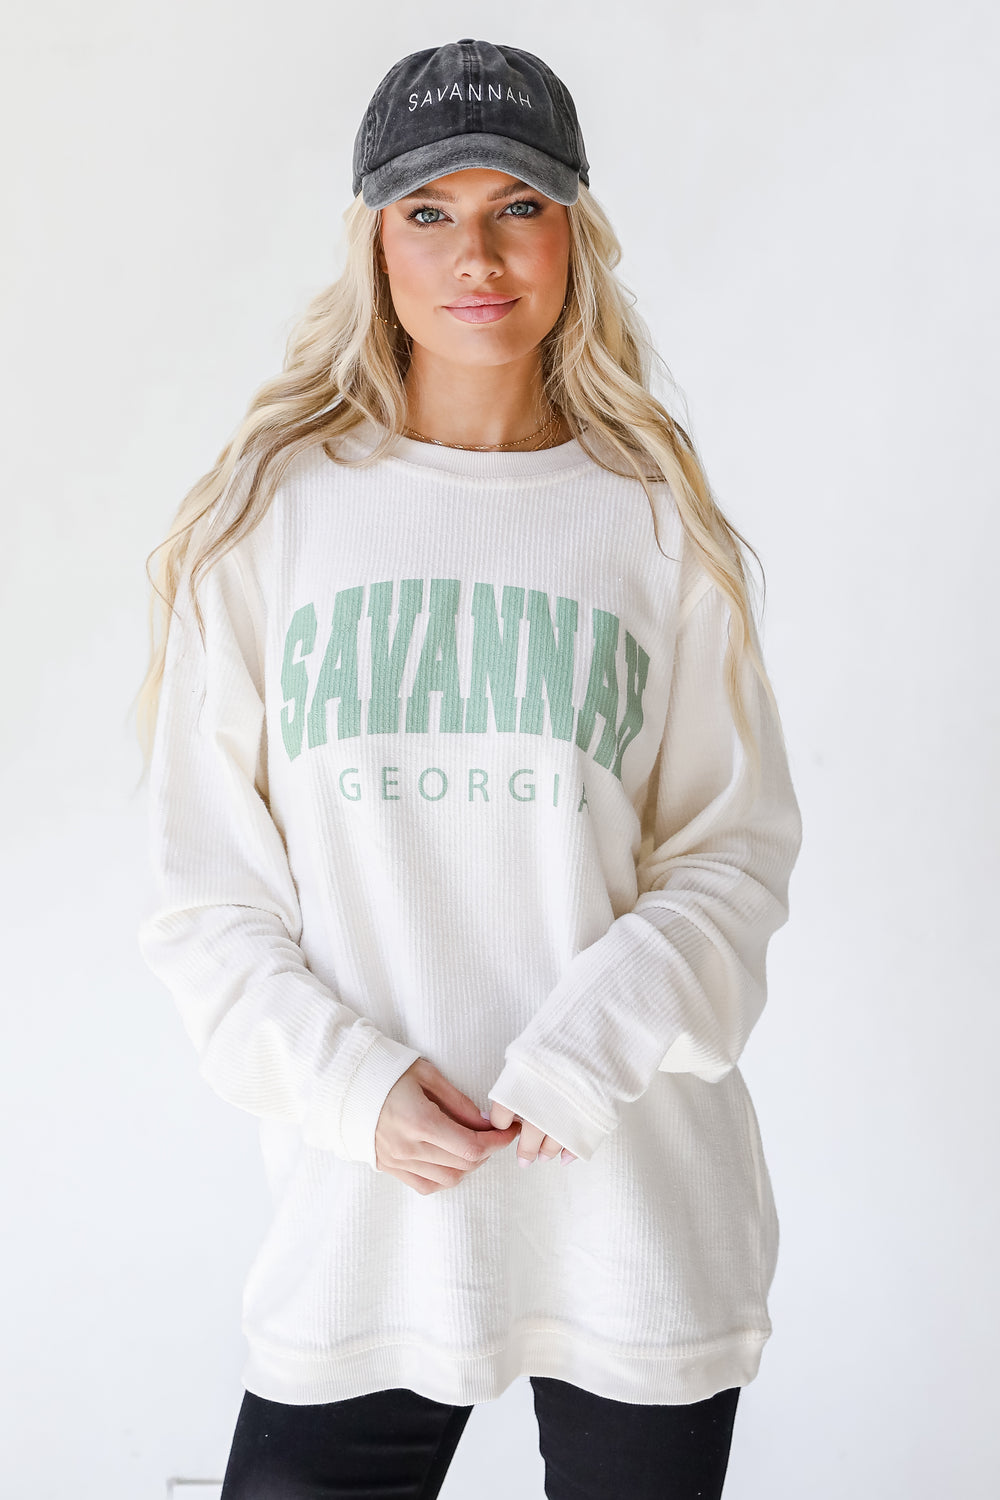 Savannah Corded Pullover from dress up